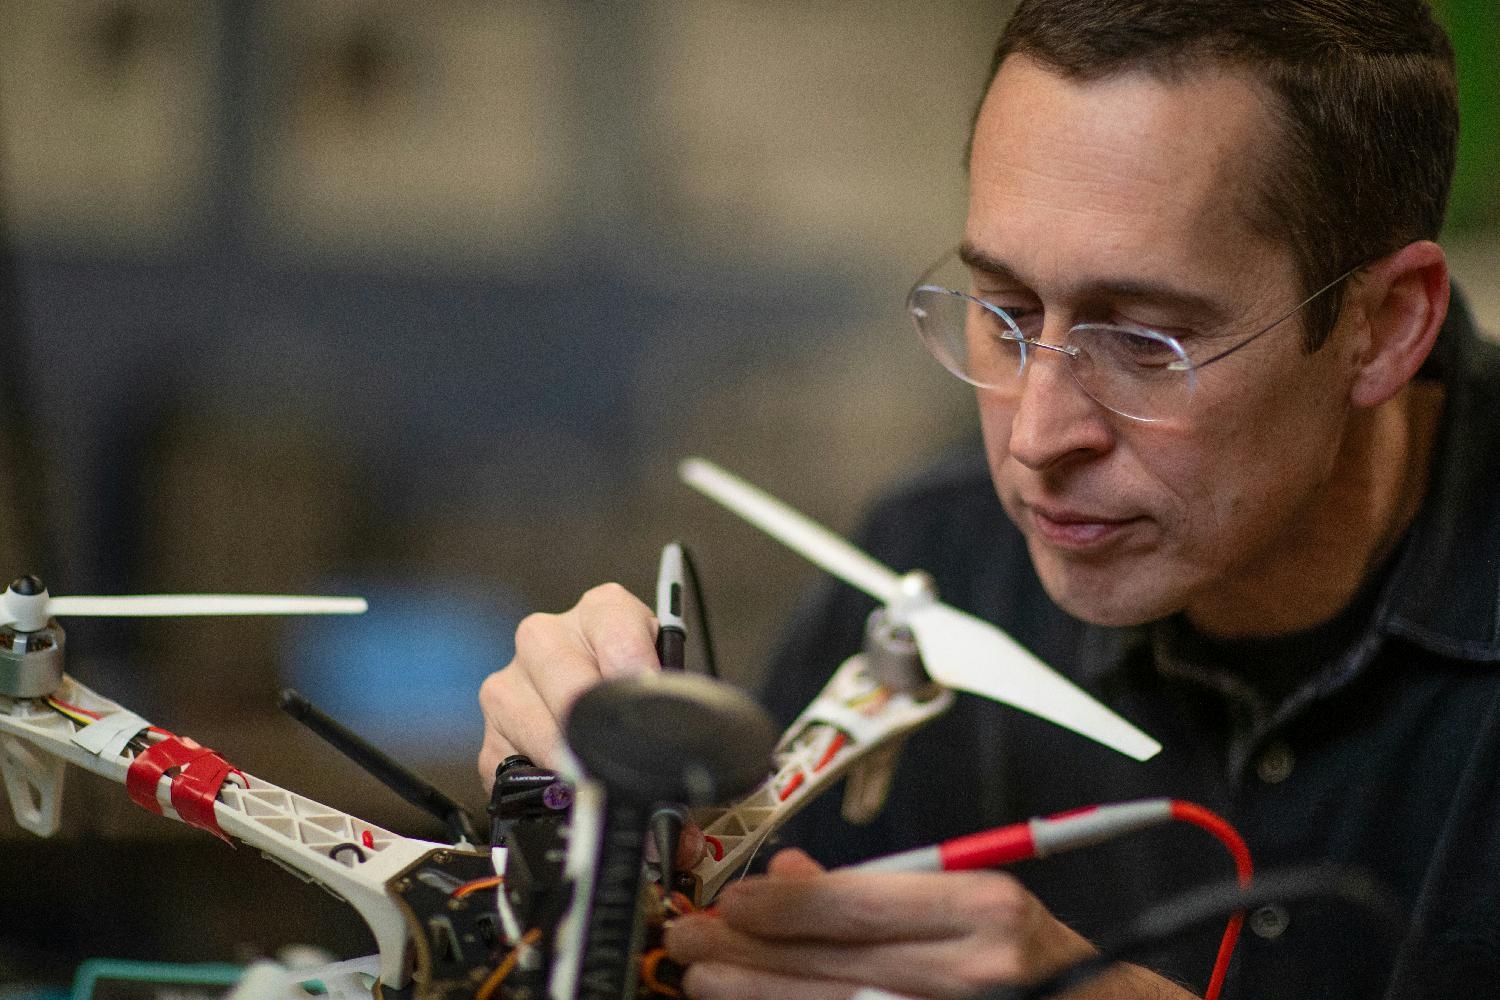 Dr. Michael Balazs works on a drone, part of MITRE's robotics research.